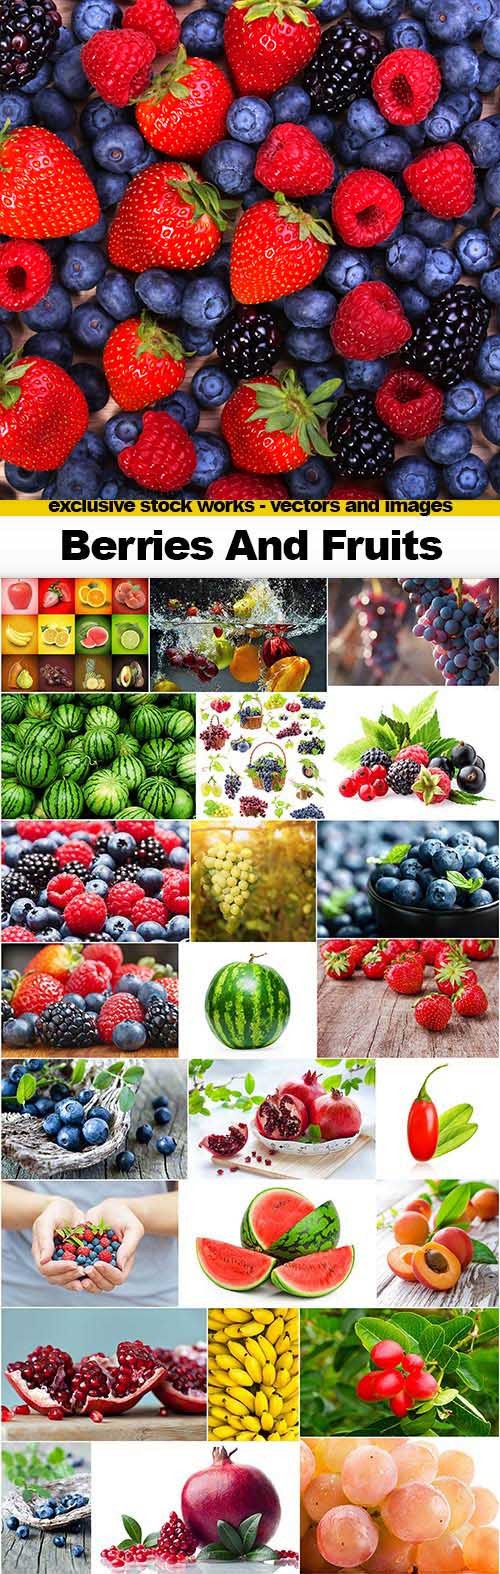 Berries and Fruits 